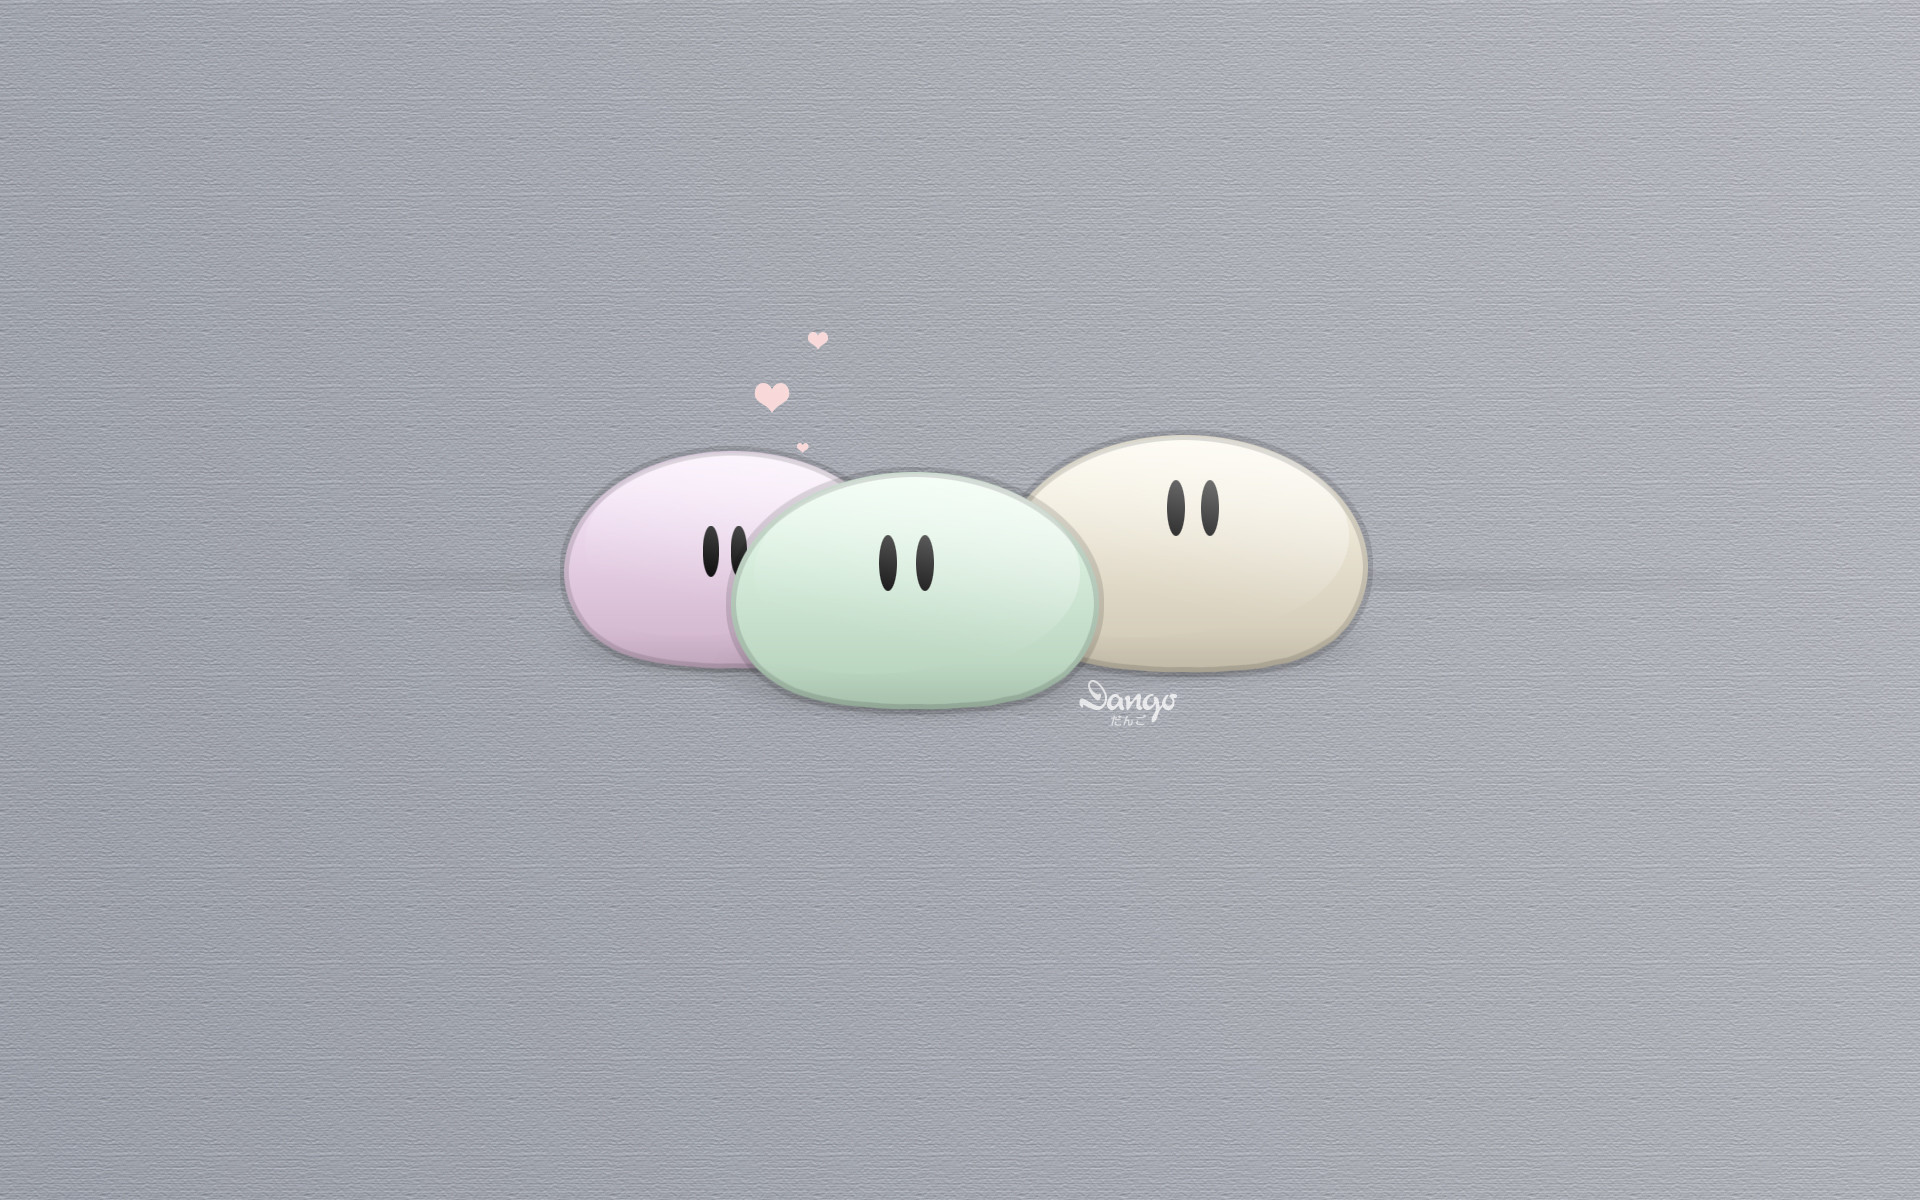 1920x1200 53 images about Dangos on We Heart It | See more about dango, clannad and  anime